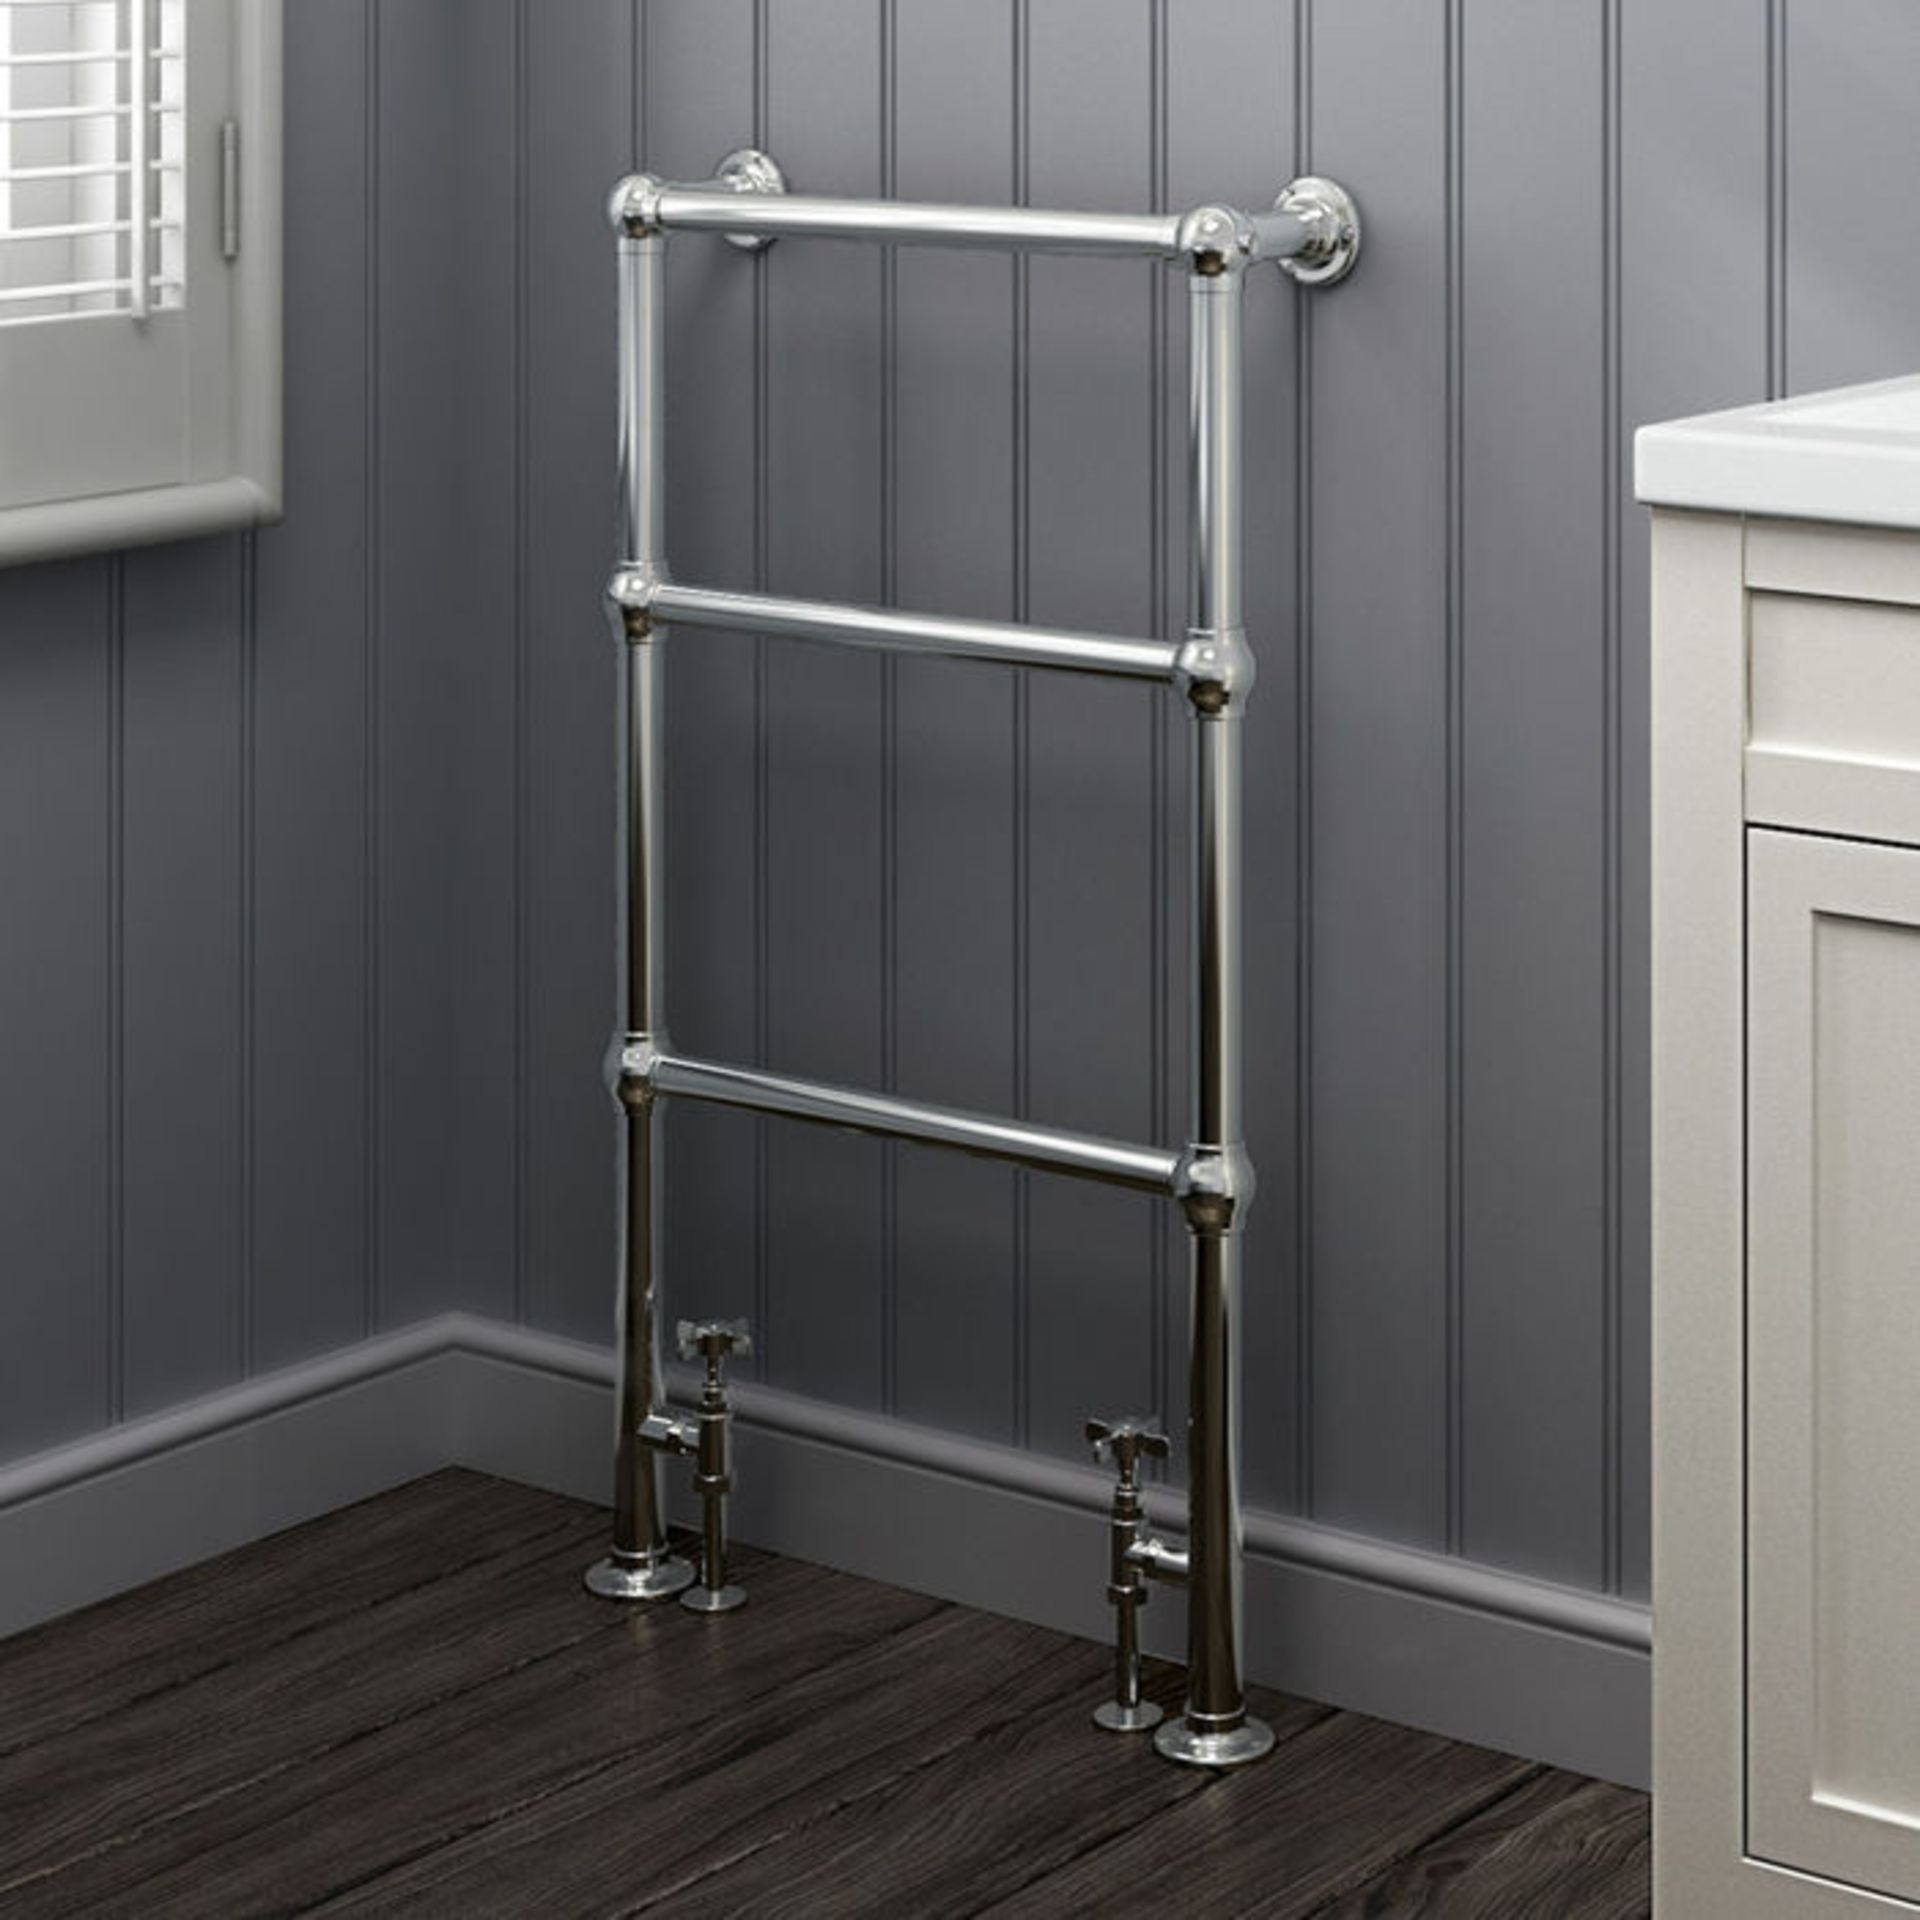 New Boxed (H14) 914x535mm Traditional Chrome Towel Rail Radiator - Cambridge Rrp £ 337.49. - Image 2 of 2